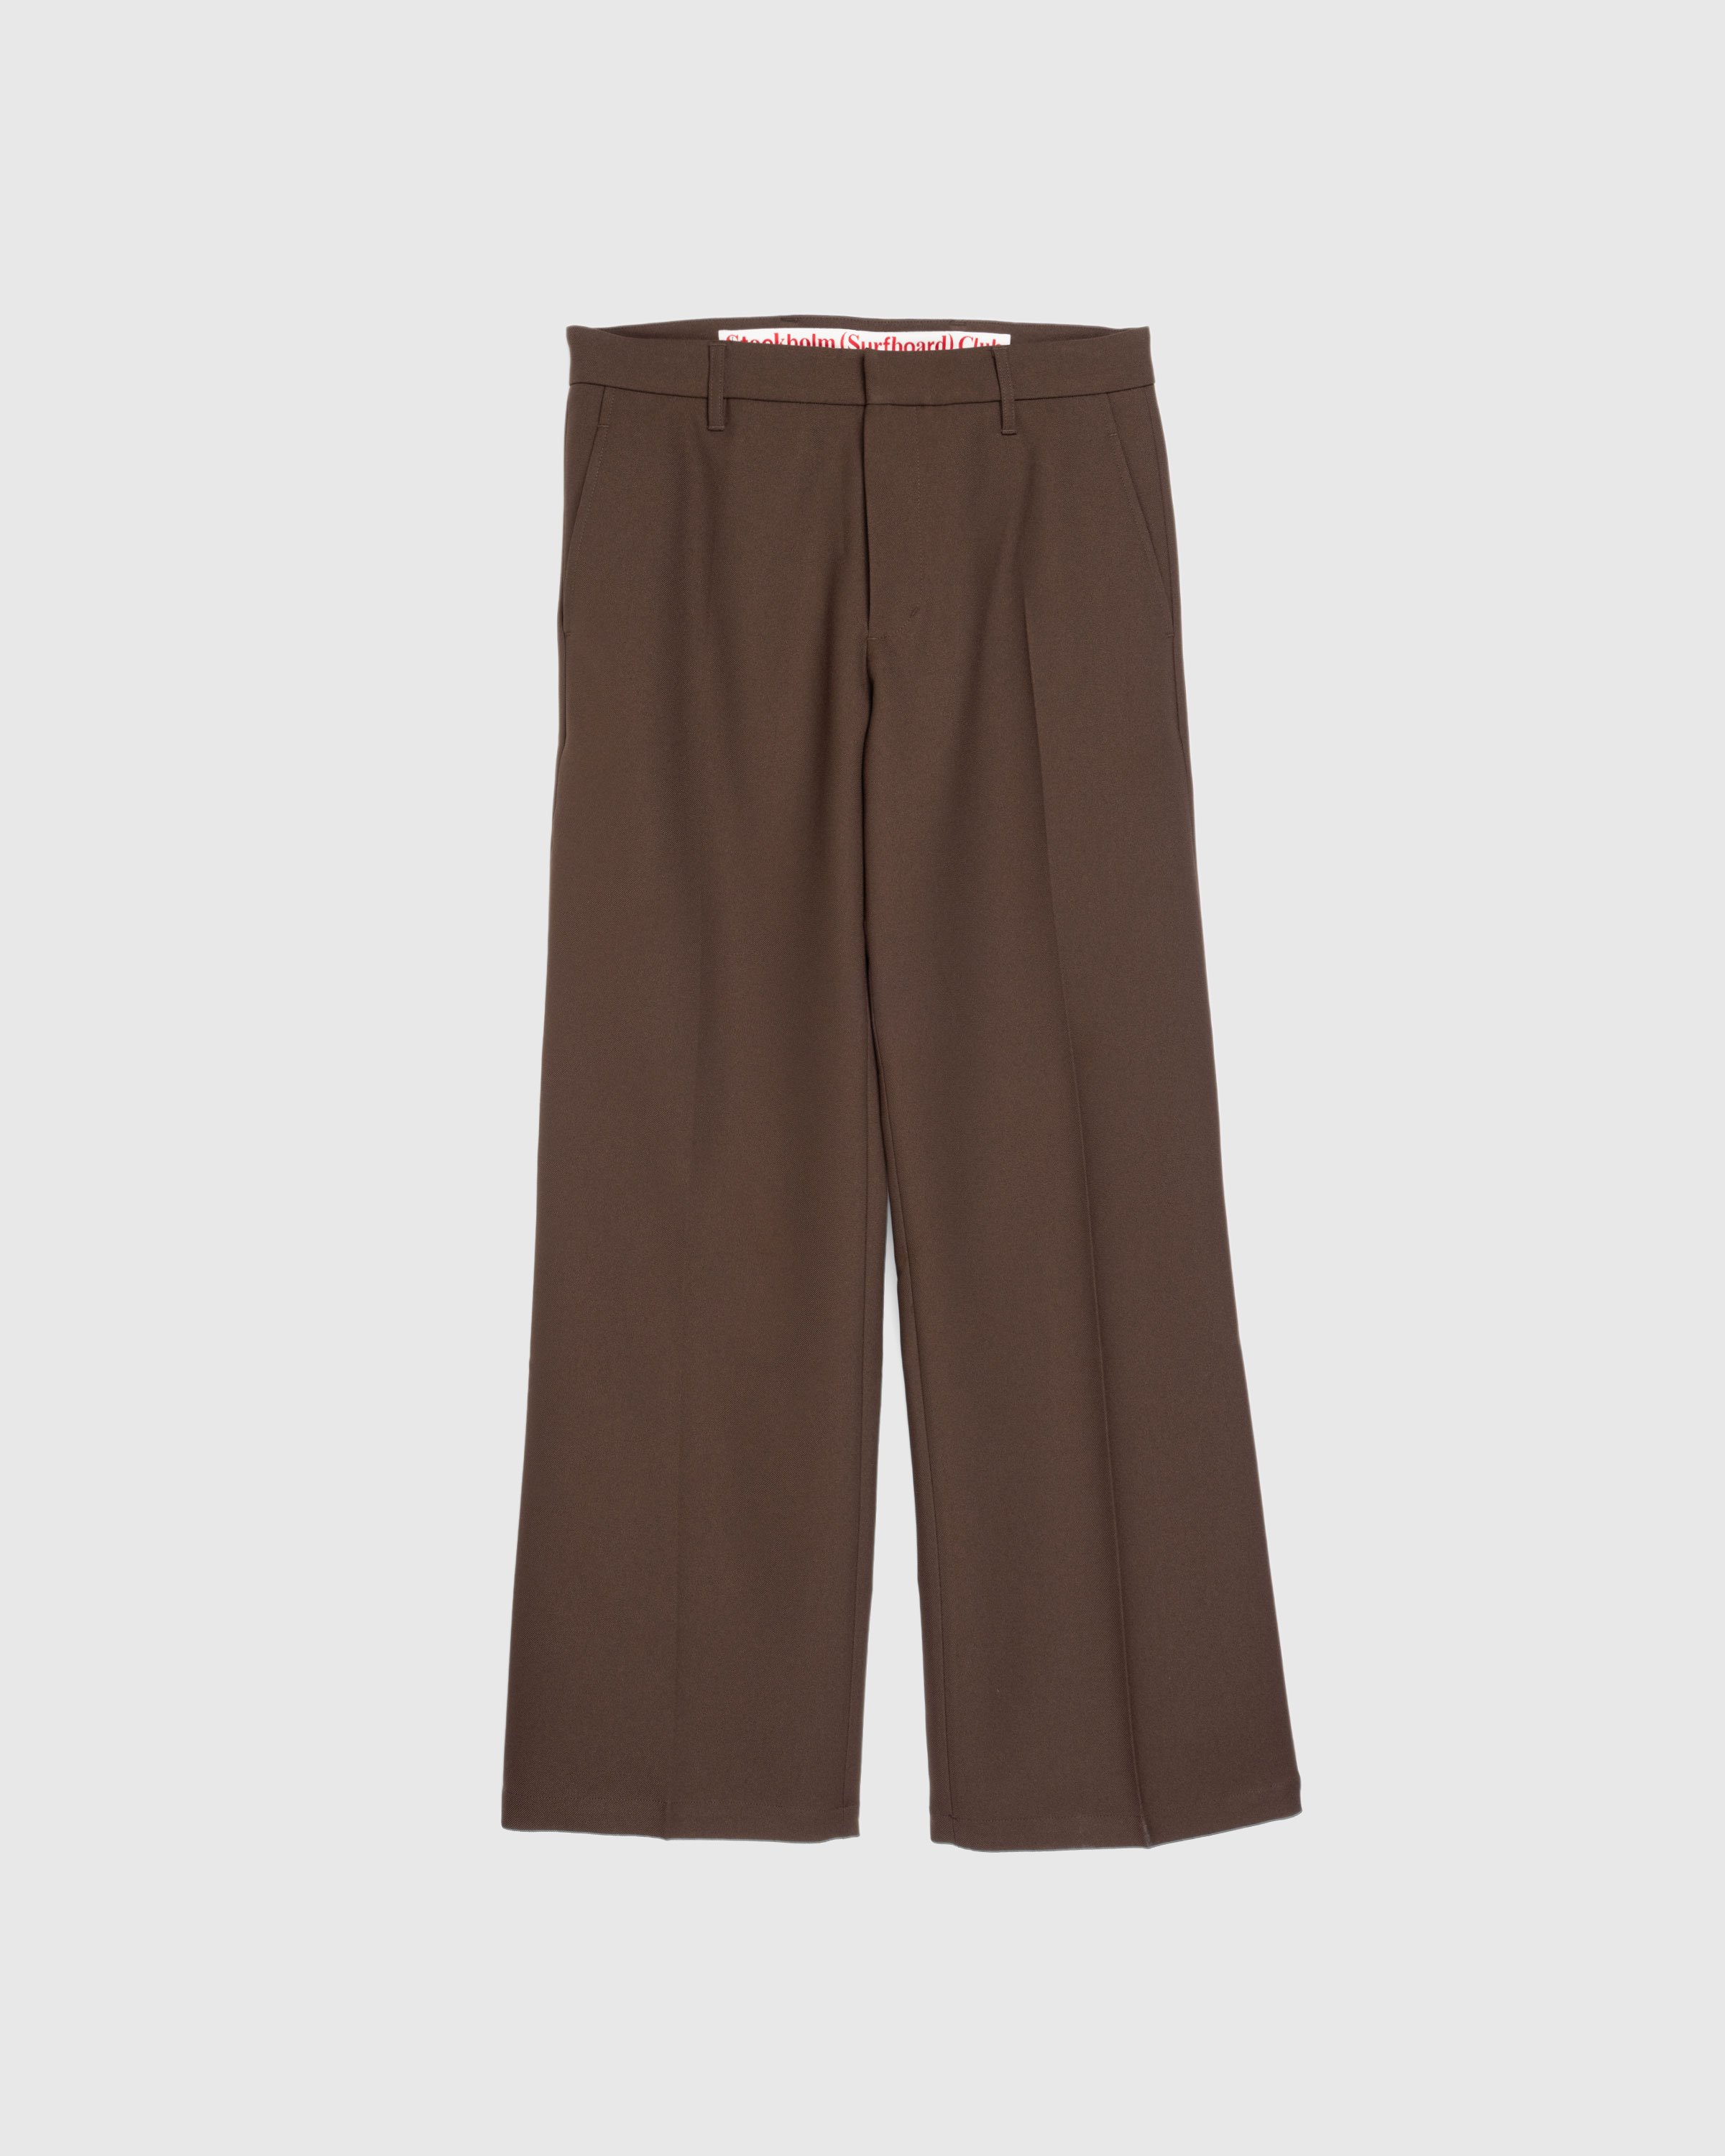 Stockholm Surfboard Club - Sune Brown - Clothing - Brown - Image 1